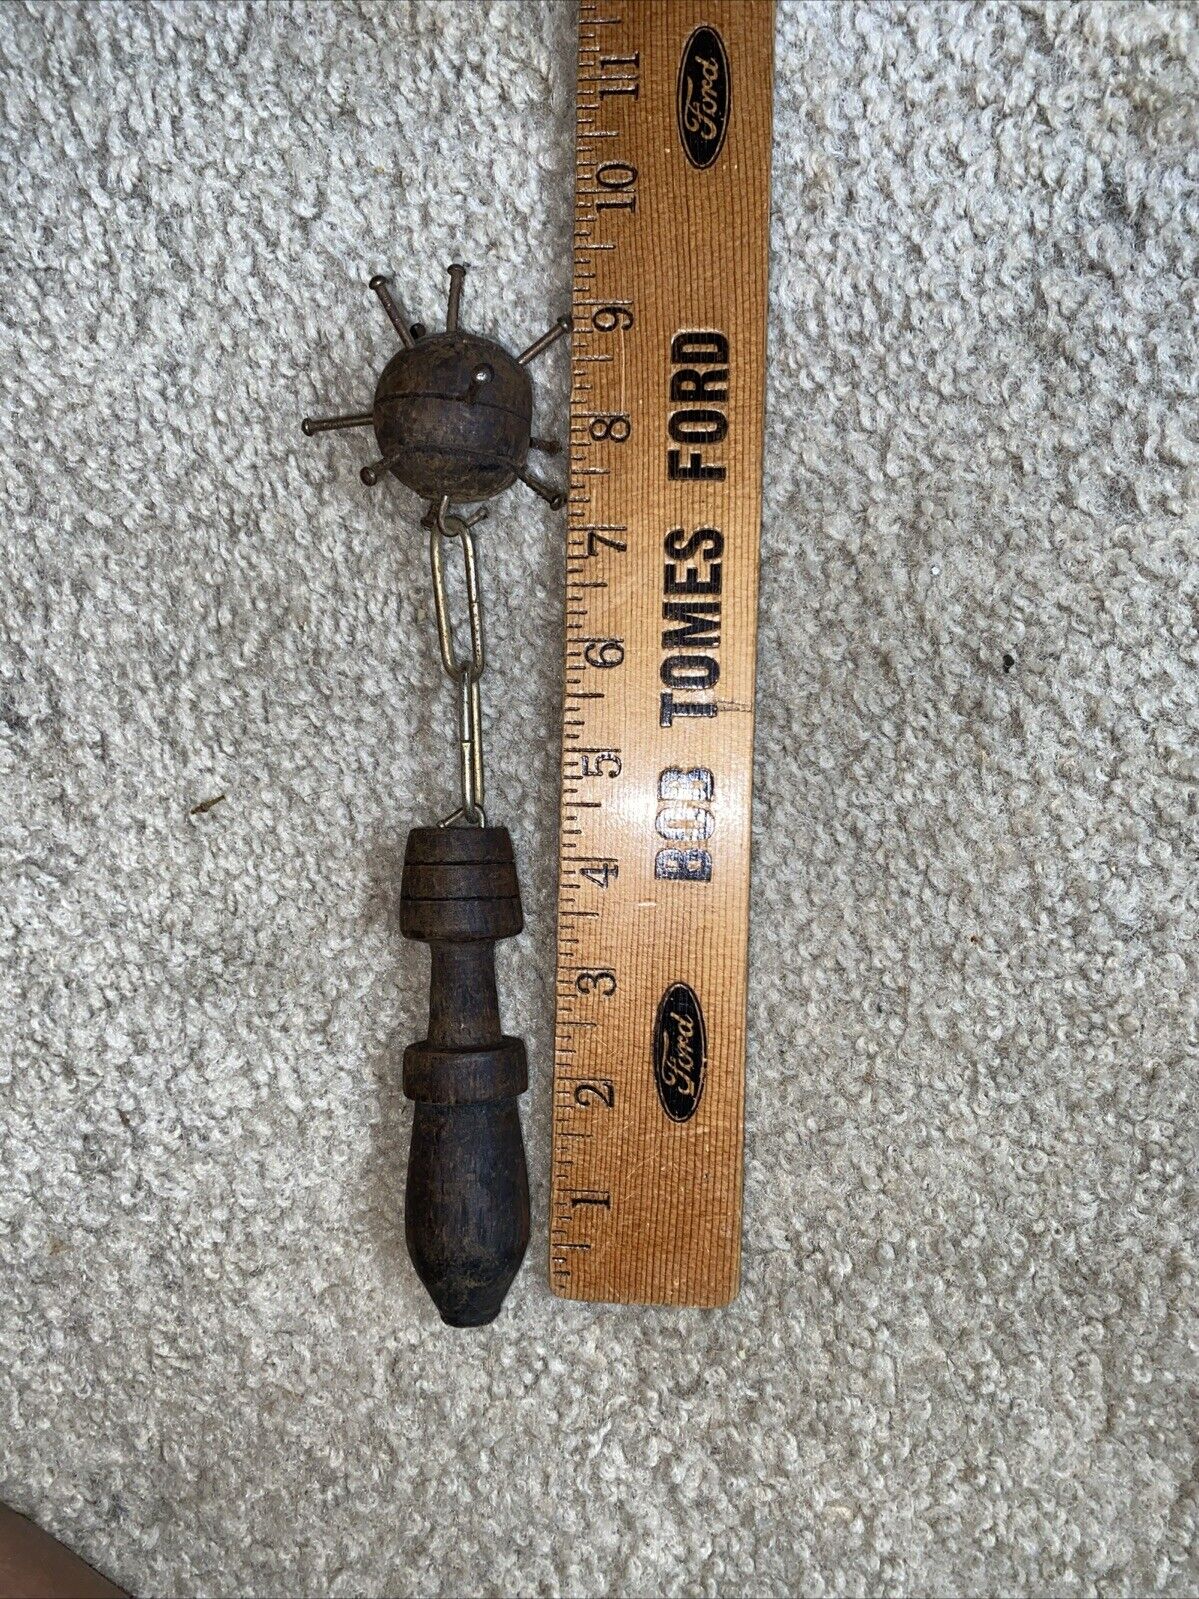 Antique Iron Spiked Flail Mace Wooden Ball & Handle Old Chain Linked 8 Inch Long